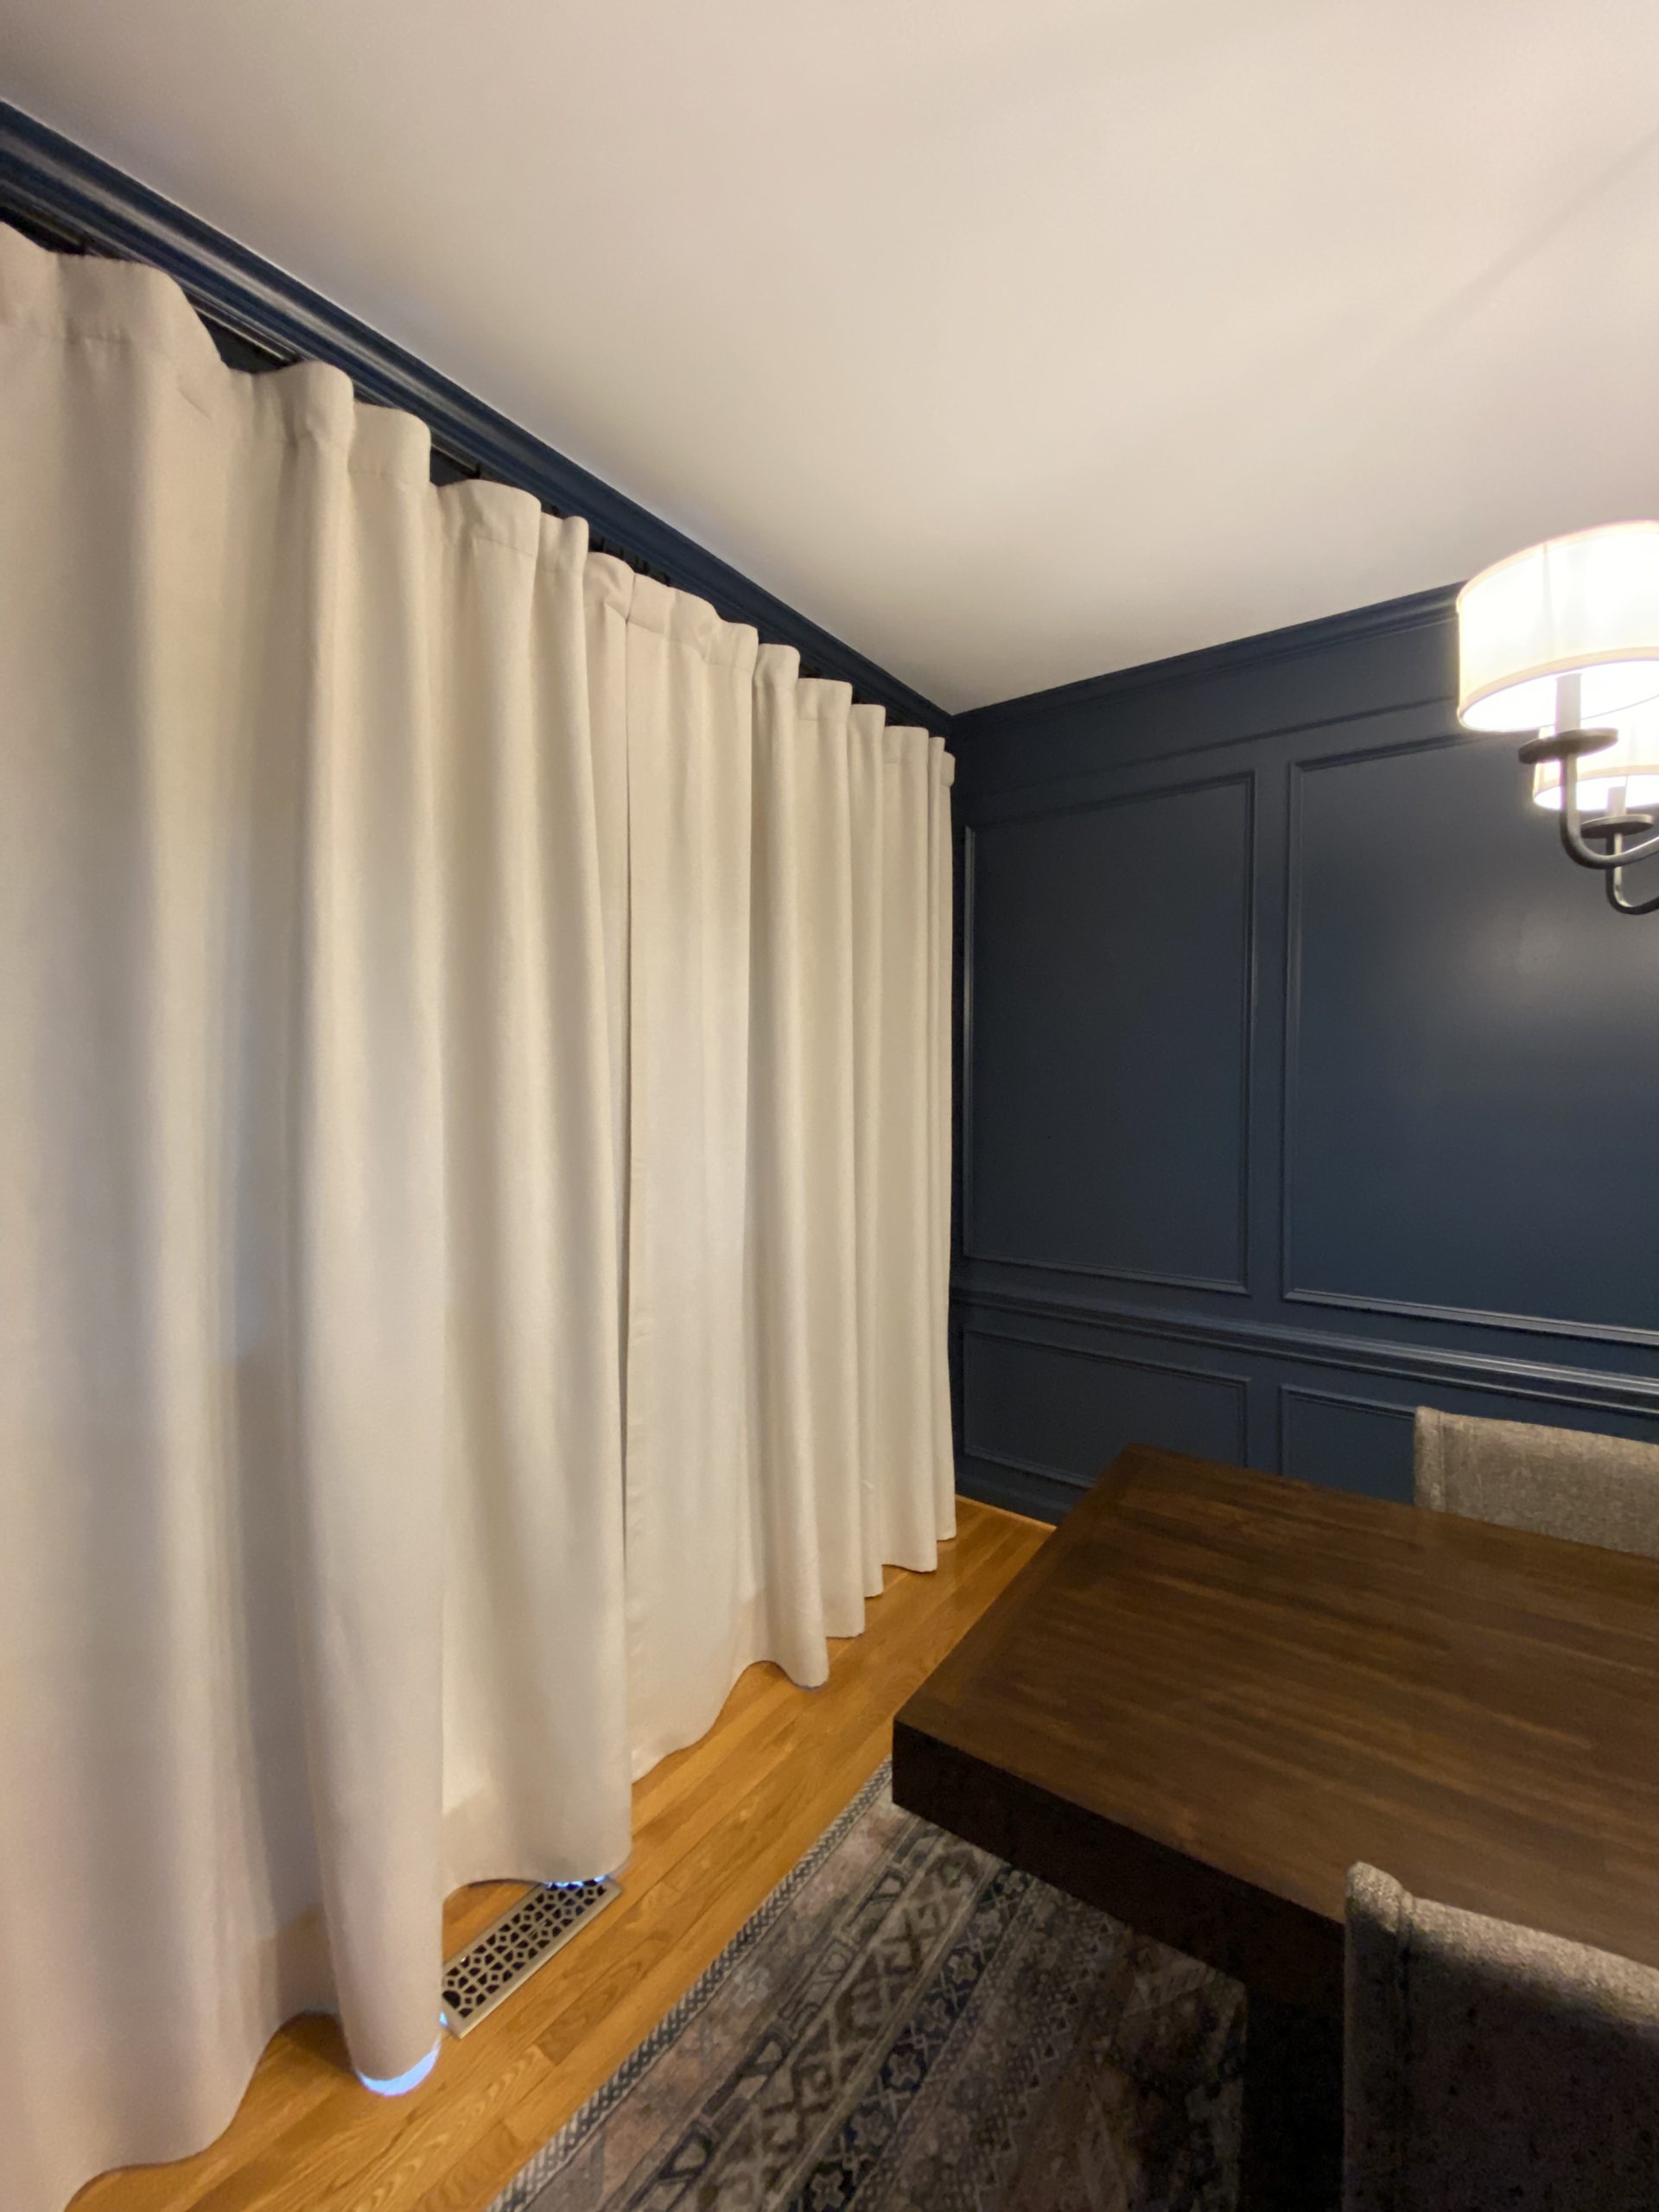 hang curtains without drilling holes | jamie's home blog